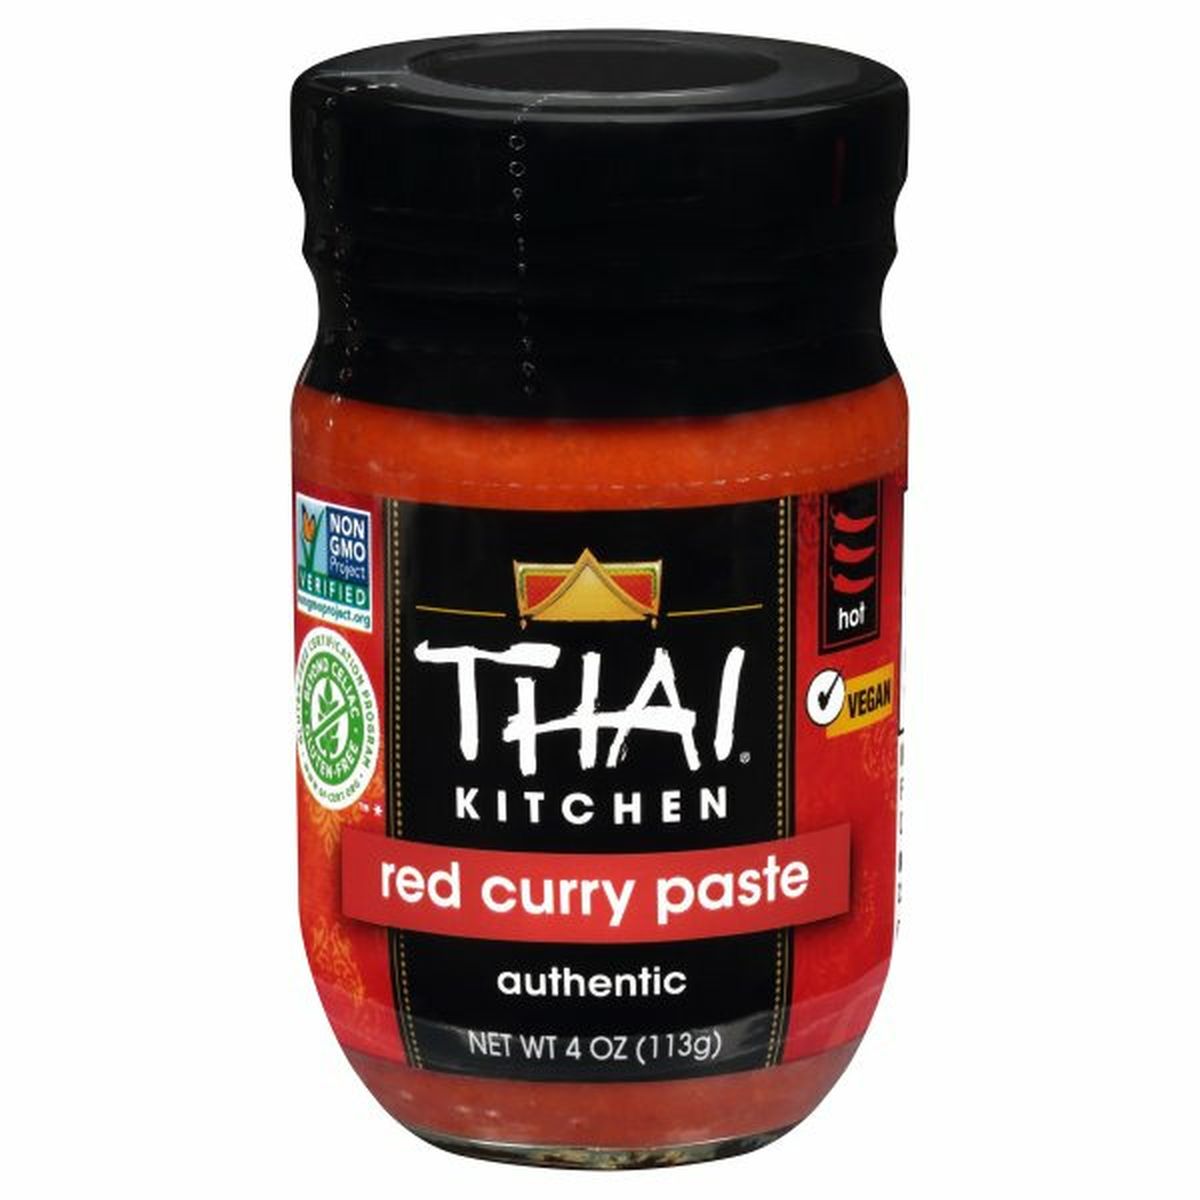 Calories in Thai Kitchens  Gluten Free Red Curry Paste